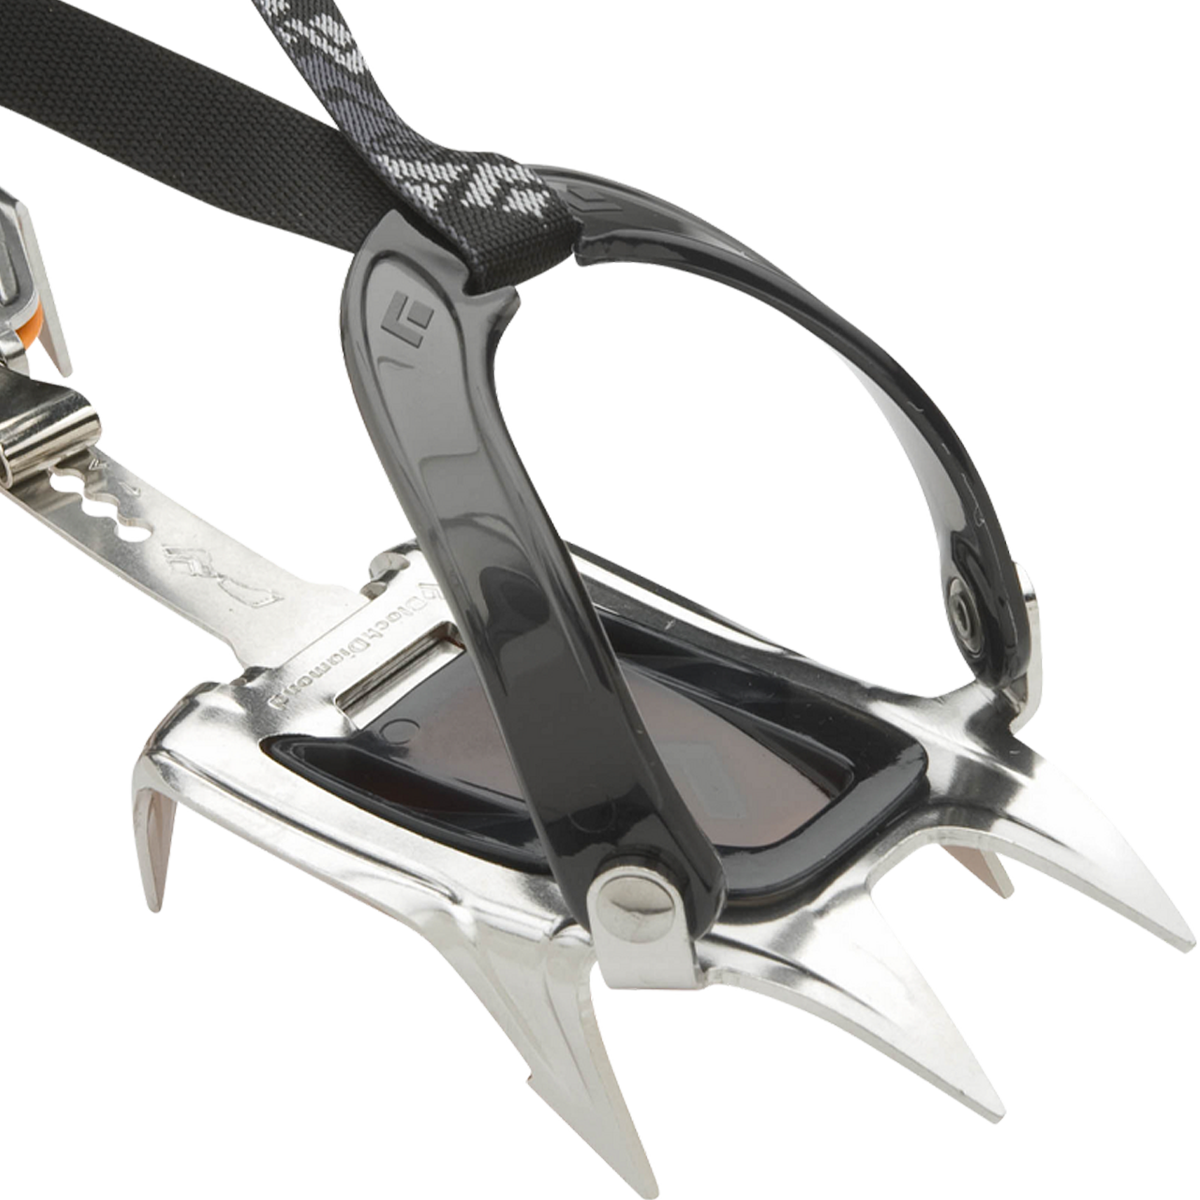 Contact Strap Crampons alternate view